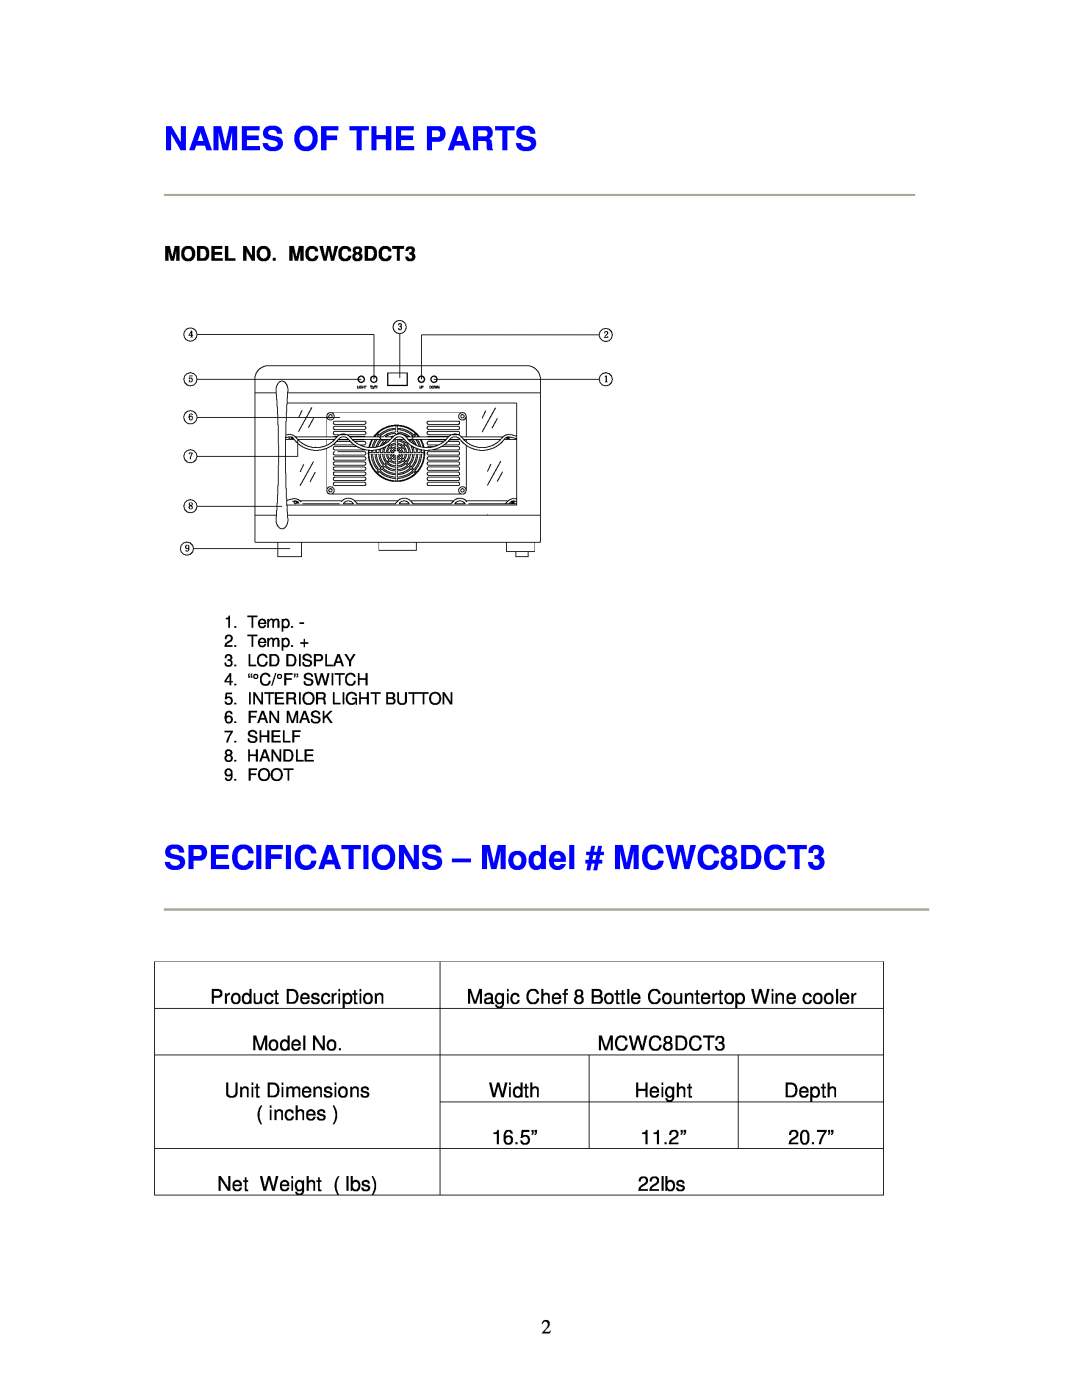 Magic Chef instruction manual Names Of The Parts, SPECIFICATIONS - Model # MCWC8DCT3, MODEL NO. MCWC8DCT3 